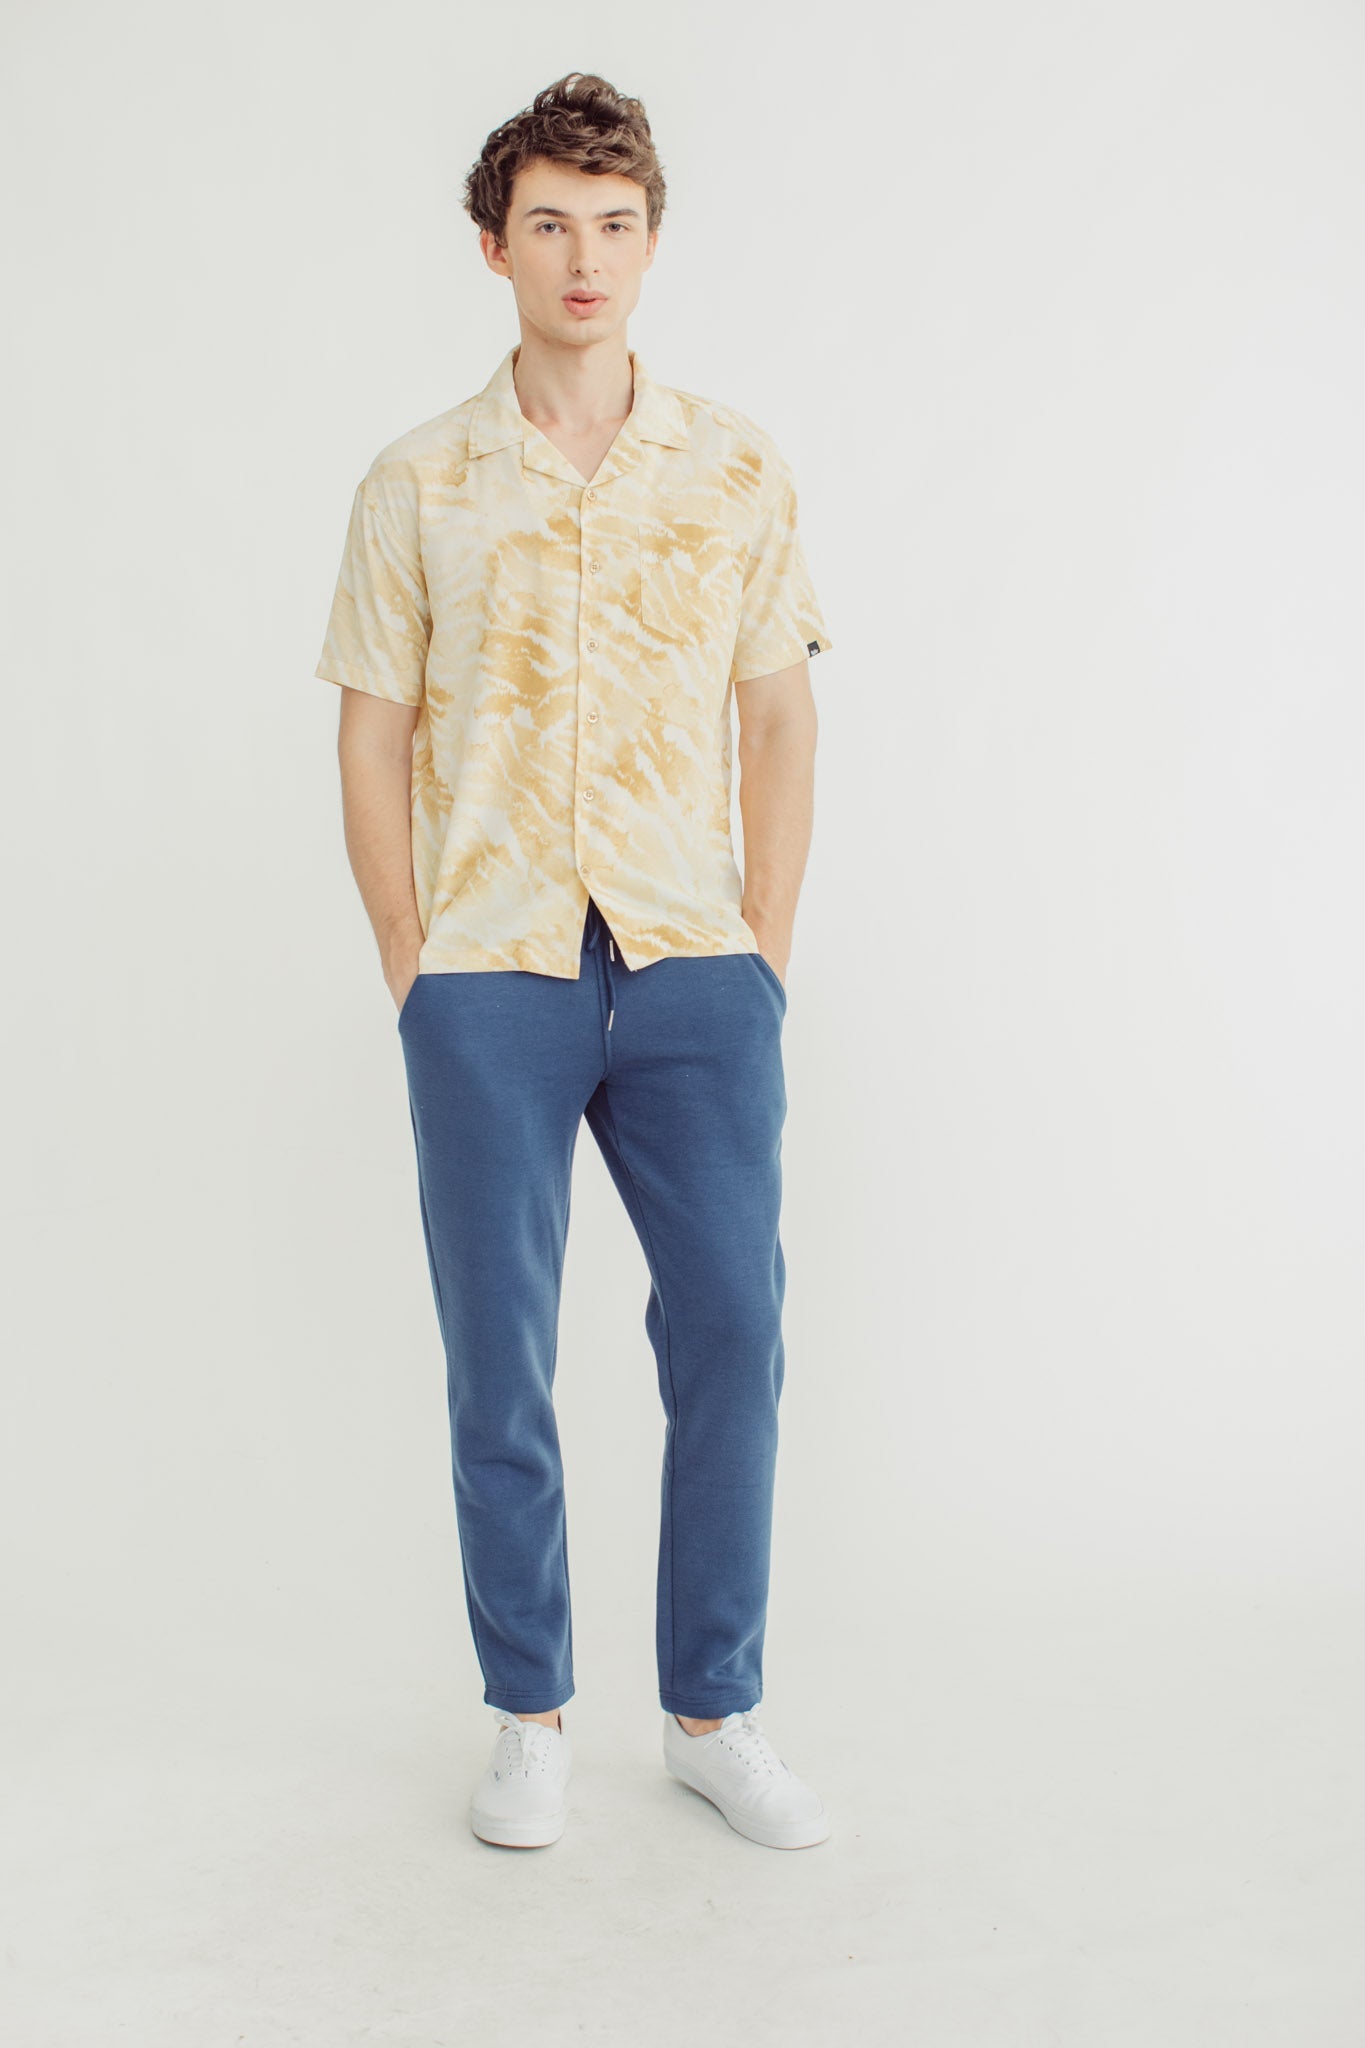 Jay Woven Short Sleeve Button Down with Pocket - Mossimo PH